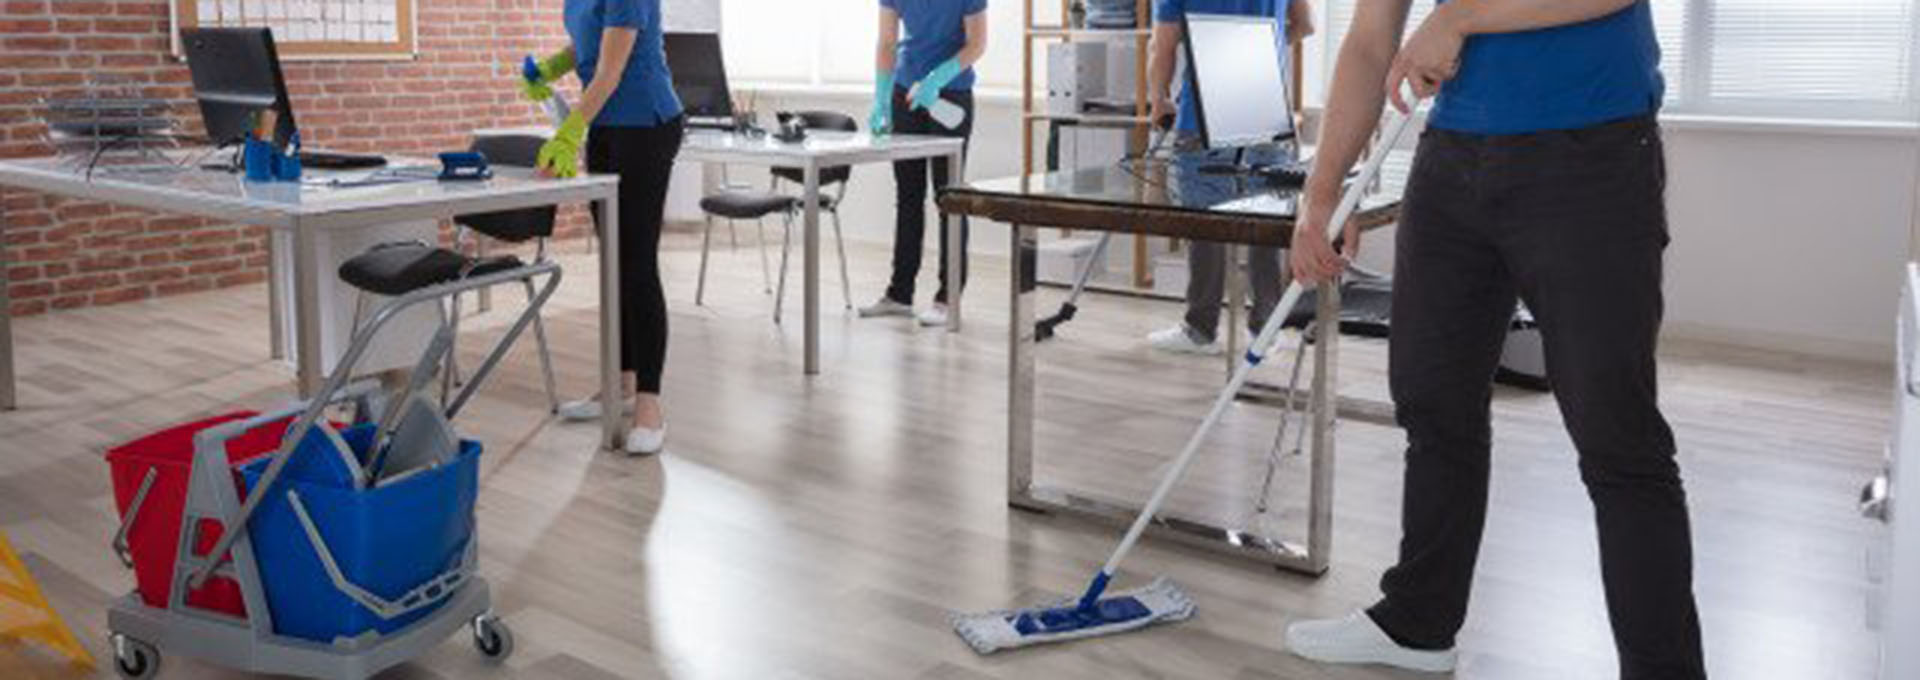 best commercial janitorial company port saint lucie florida